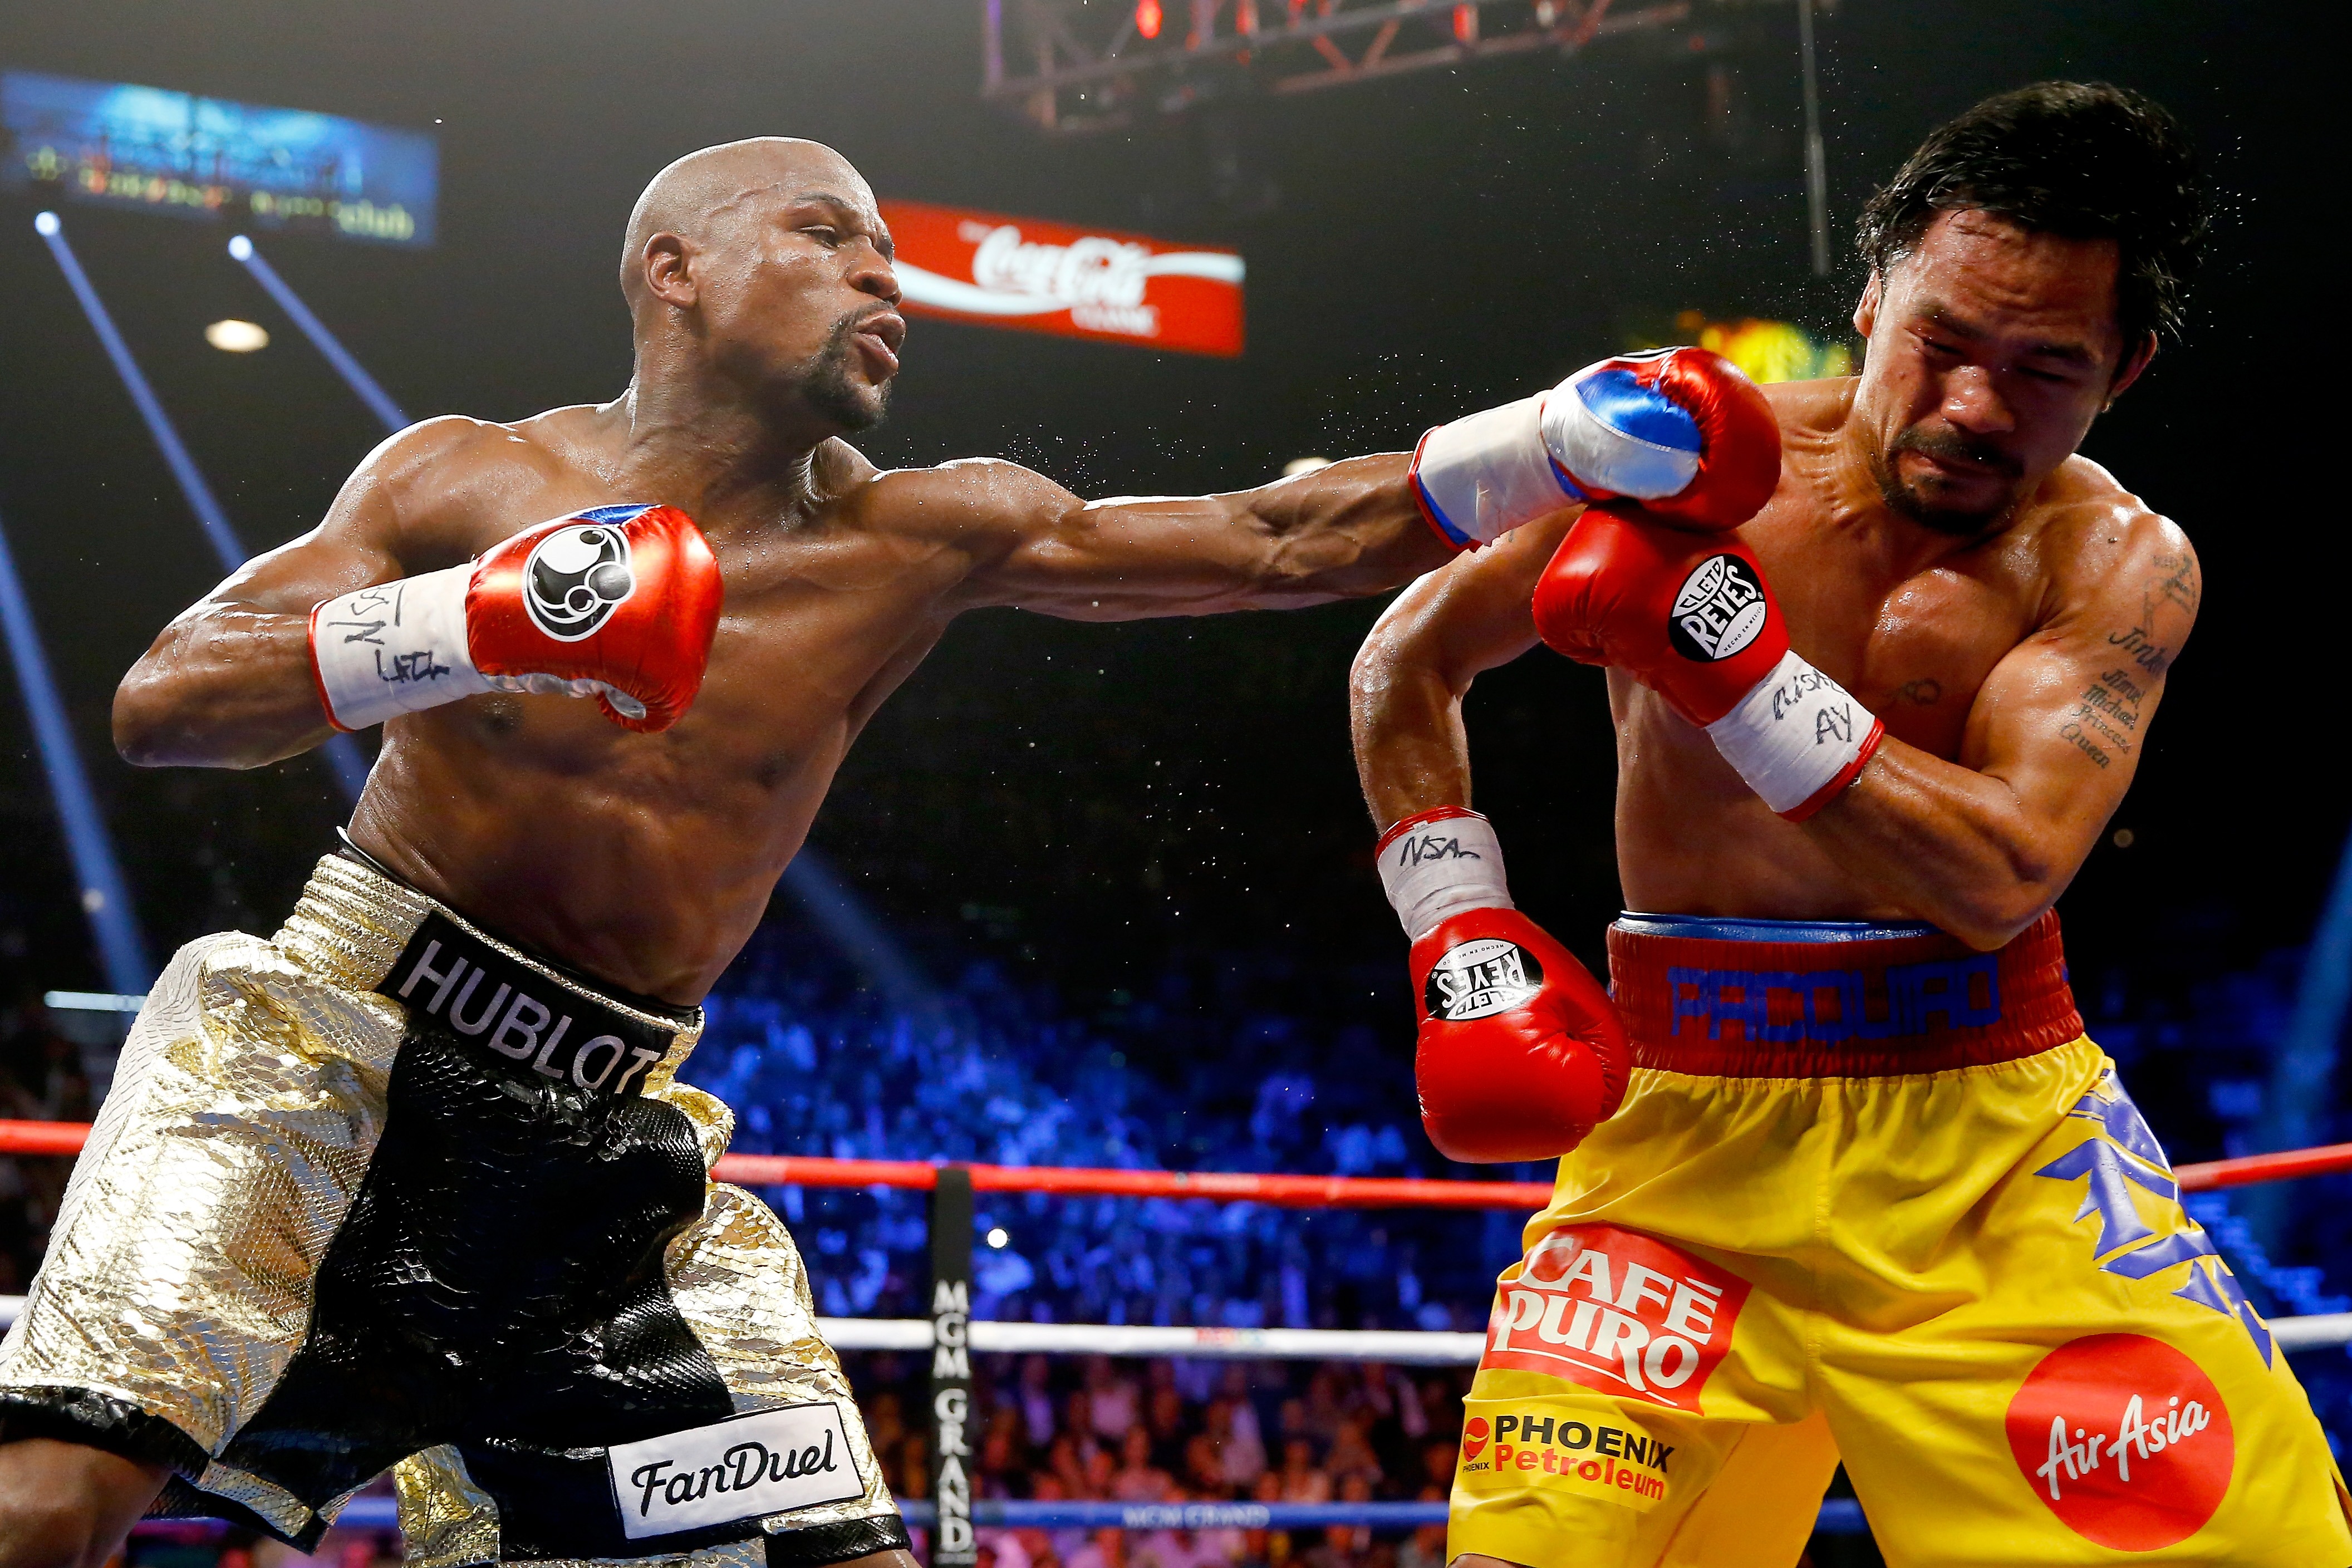 , ‘I’ll be back’ – Floyd Mayweather to fight in Japan again after Mikuru Asakura KO with Manny Pacquaio rematch teased